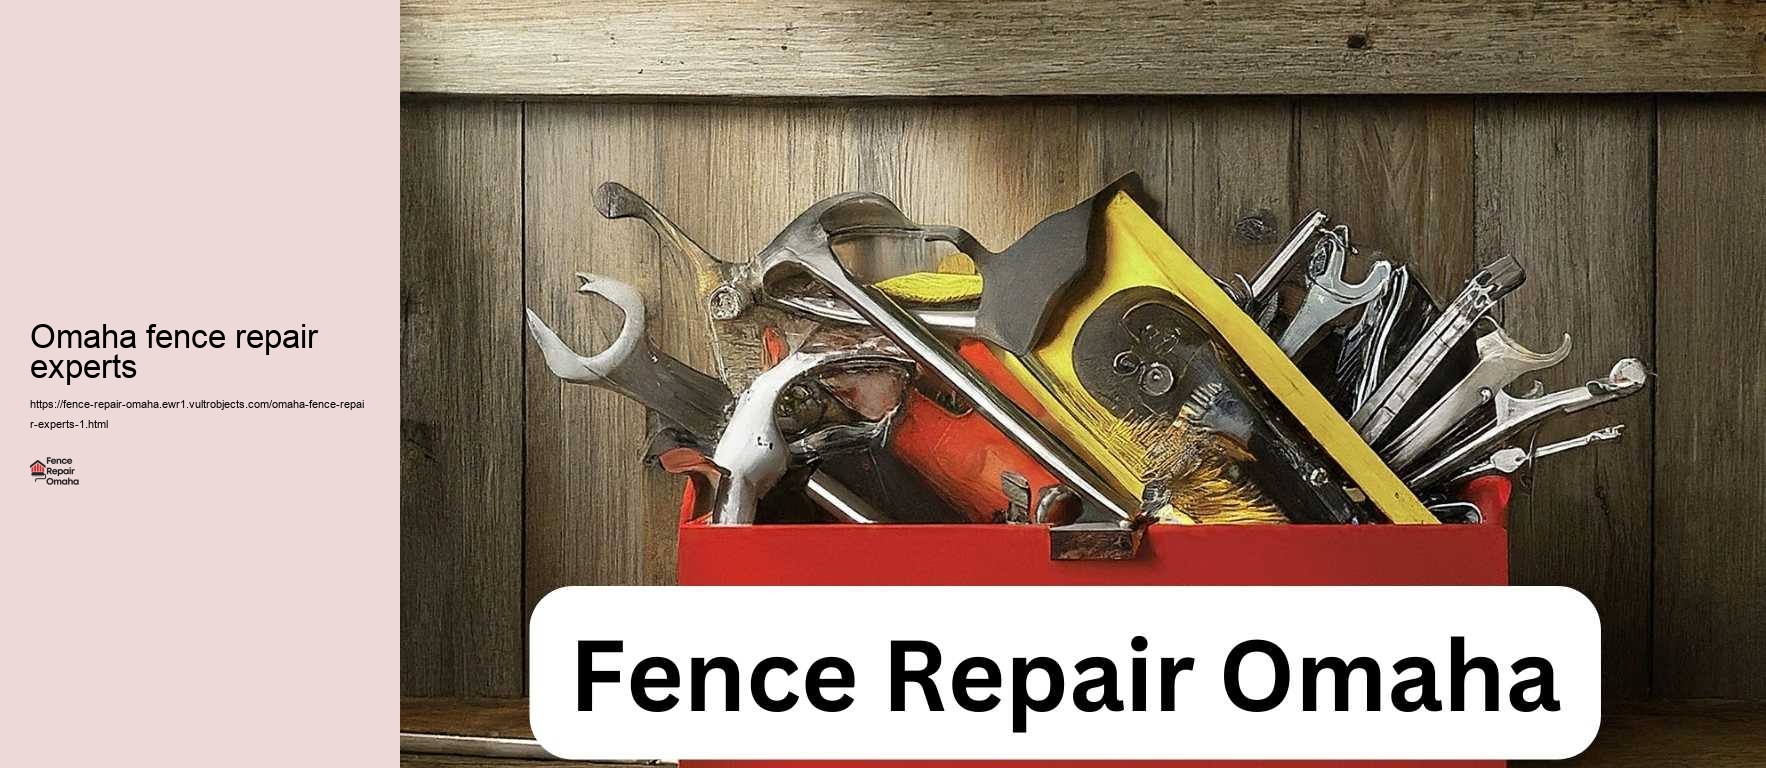 Omaha fence repair experts